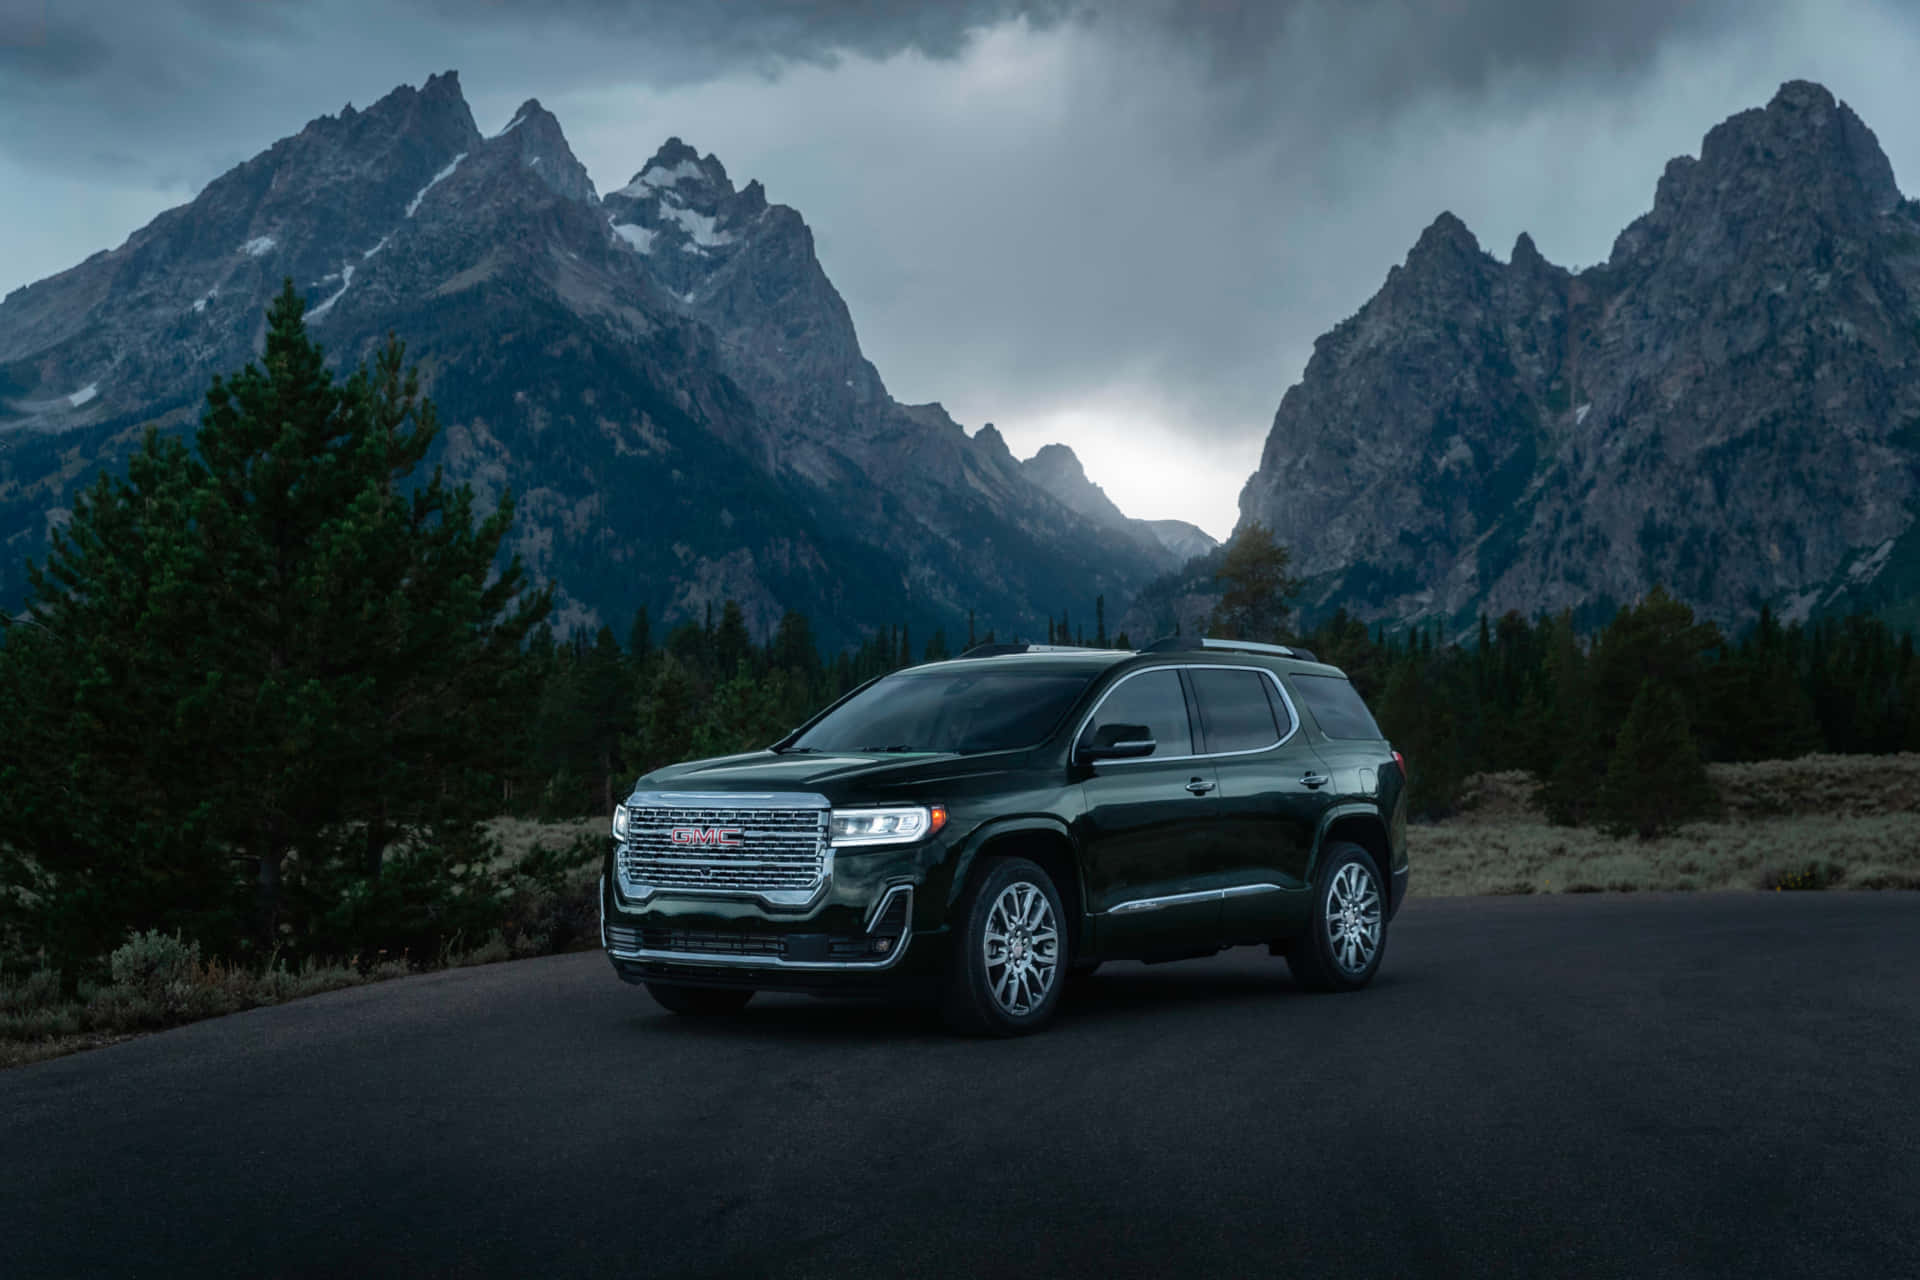 Captivating GMC Acadia in Action Wallpaper